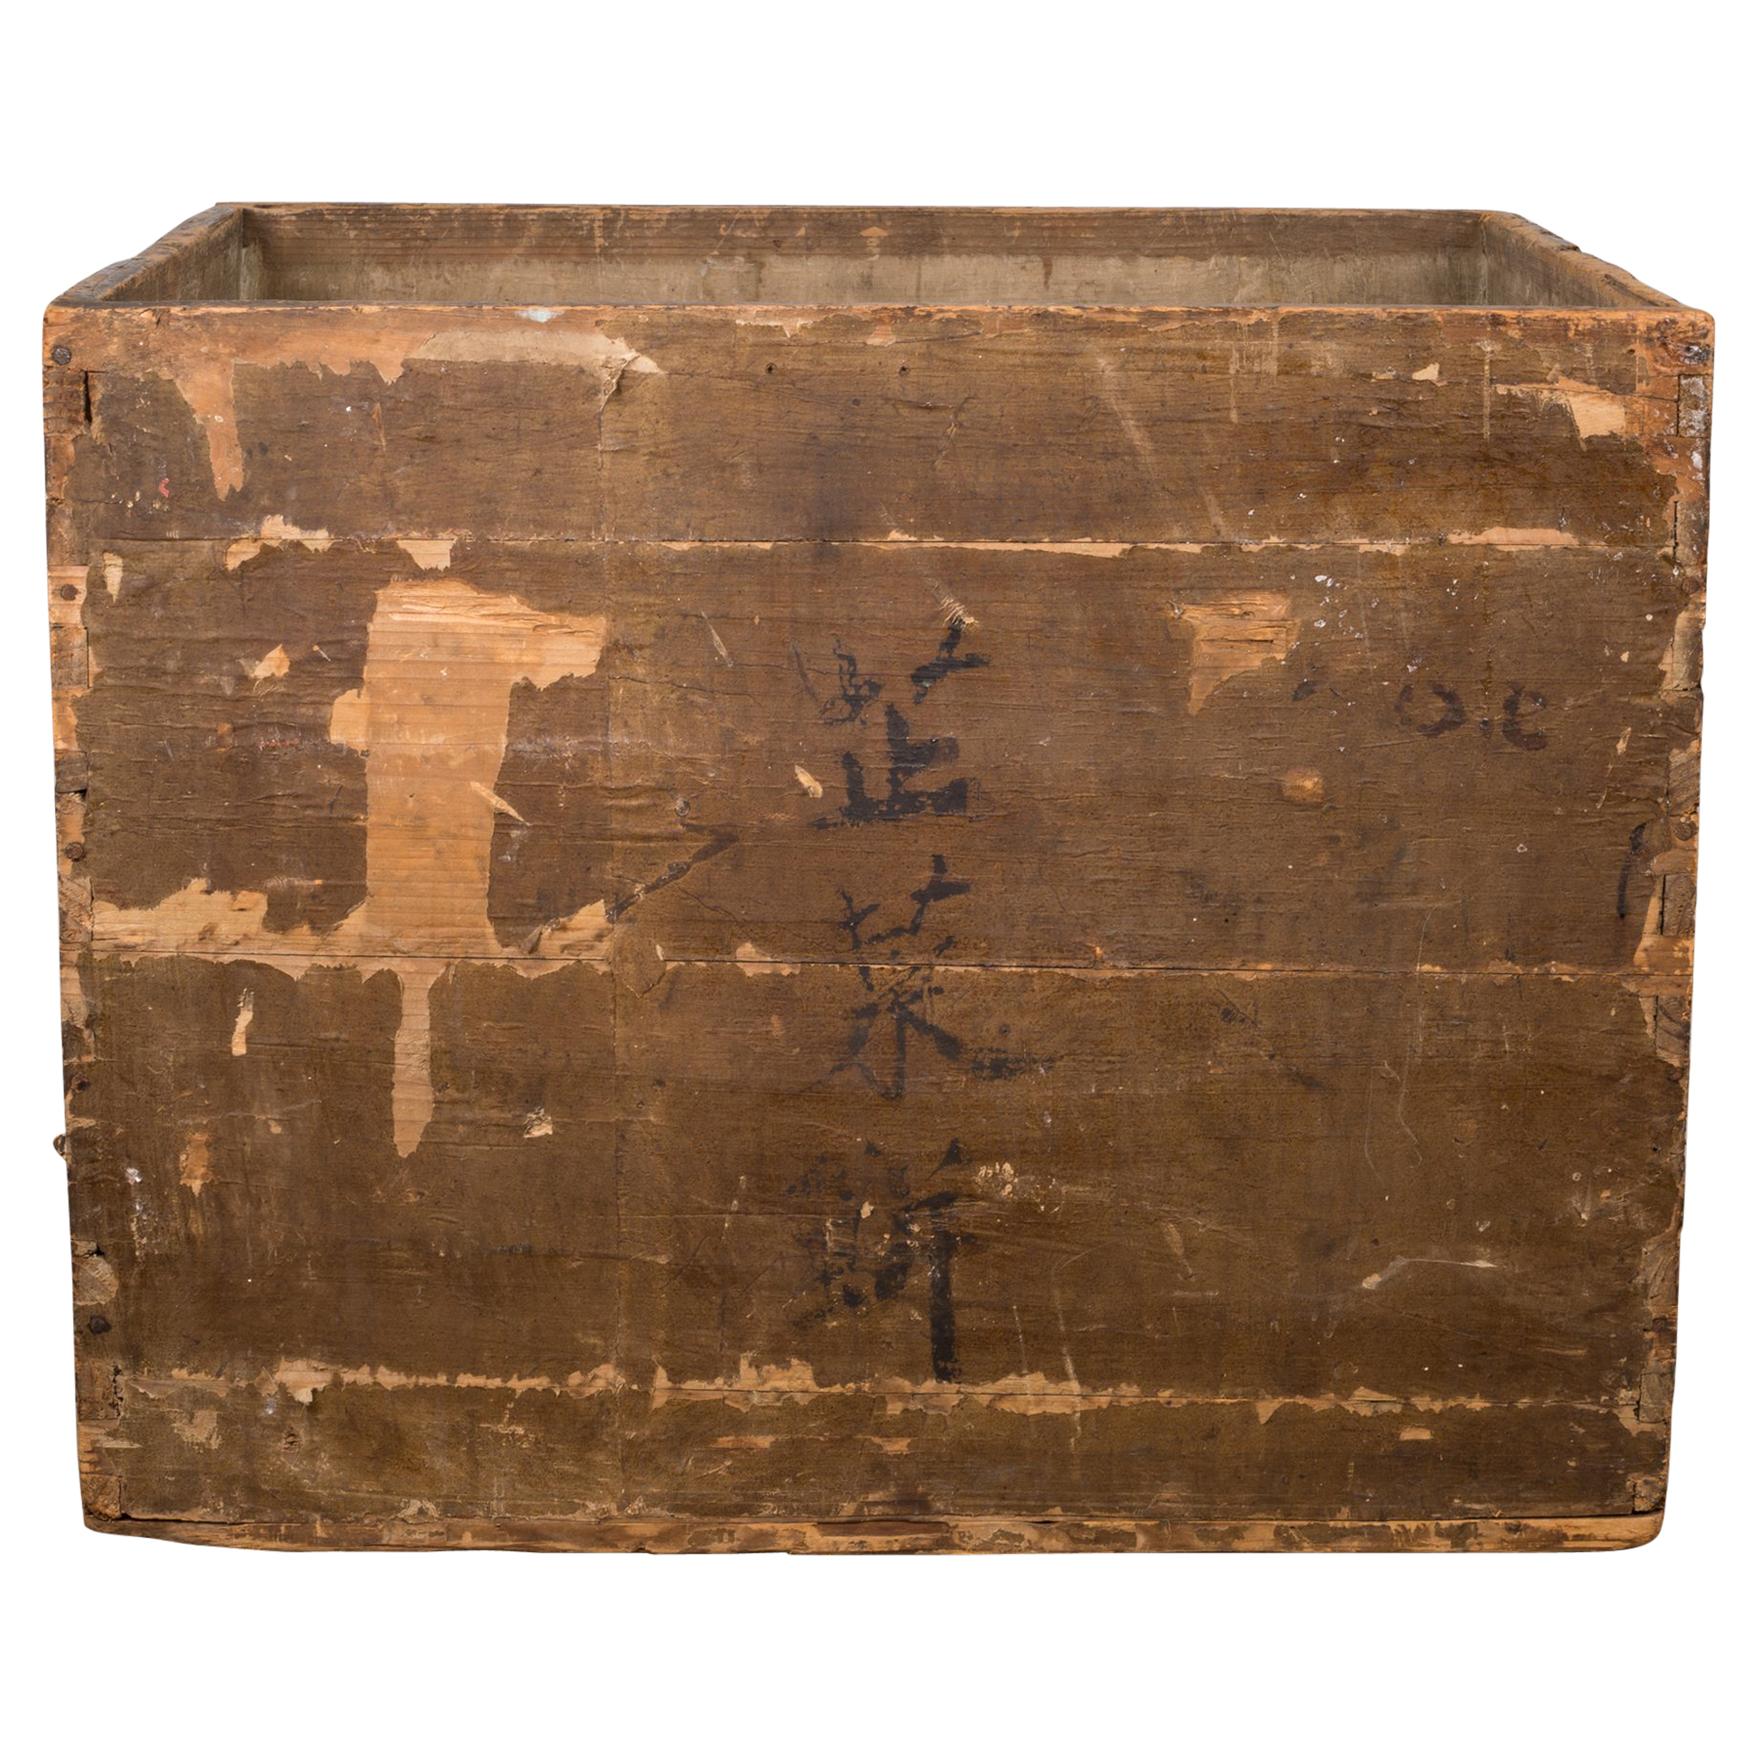 Antique Chinese Cracker and Sweets Packing Box, circa 1880